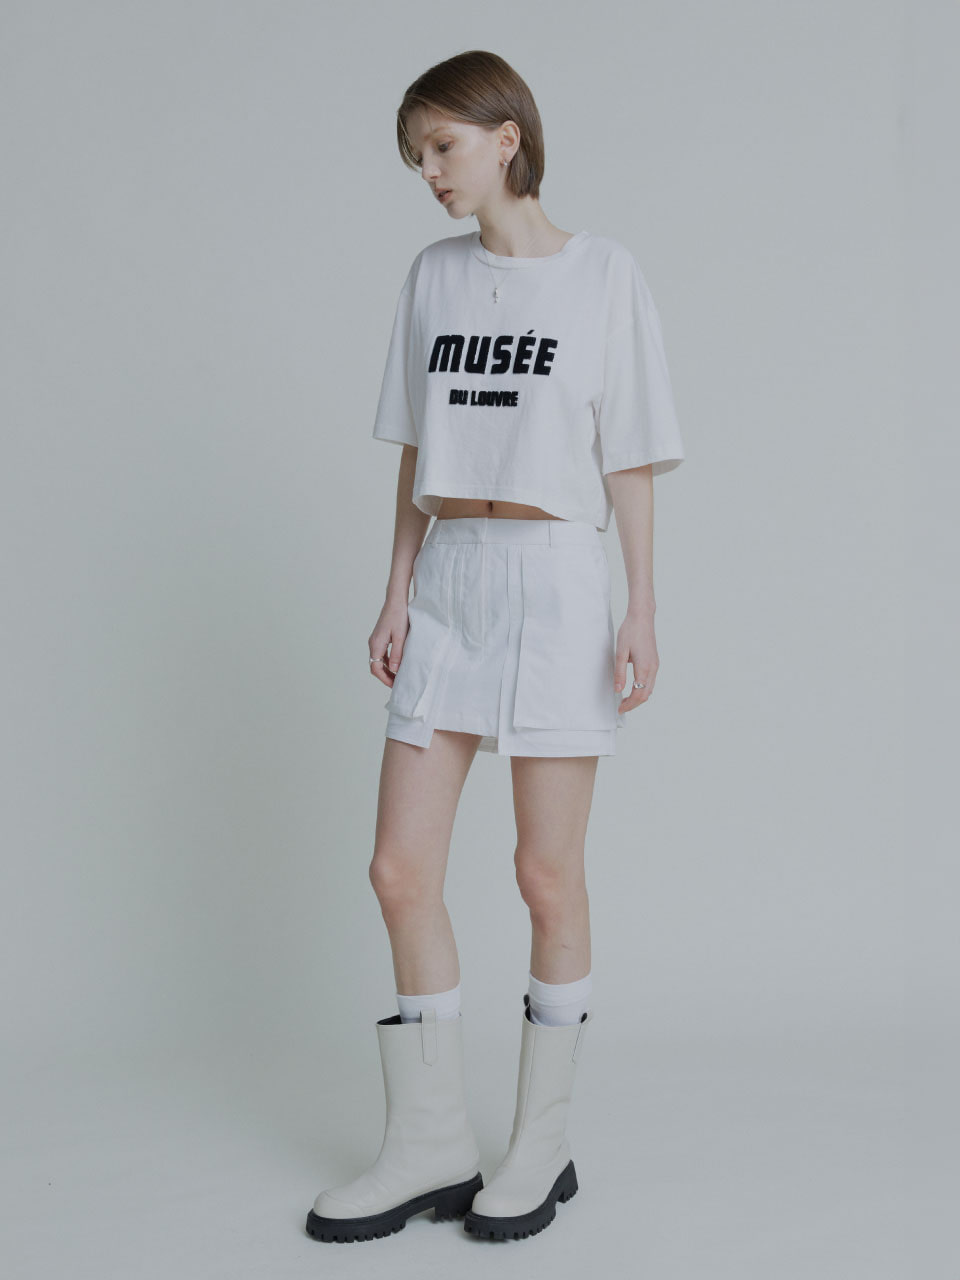 MUSEE DU LOUVRE Embroidered Cotton T-Shirt - Off White+Black